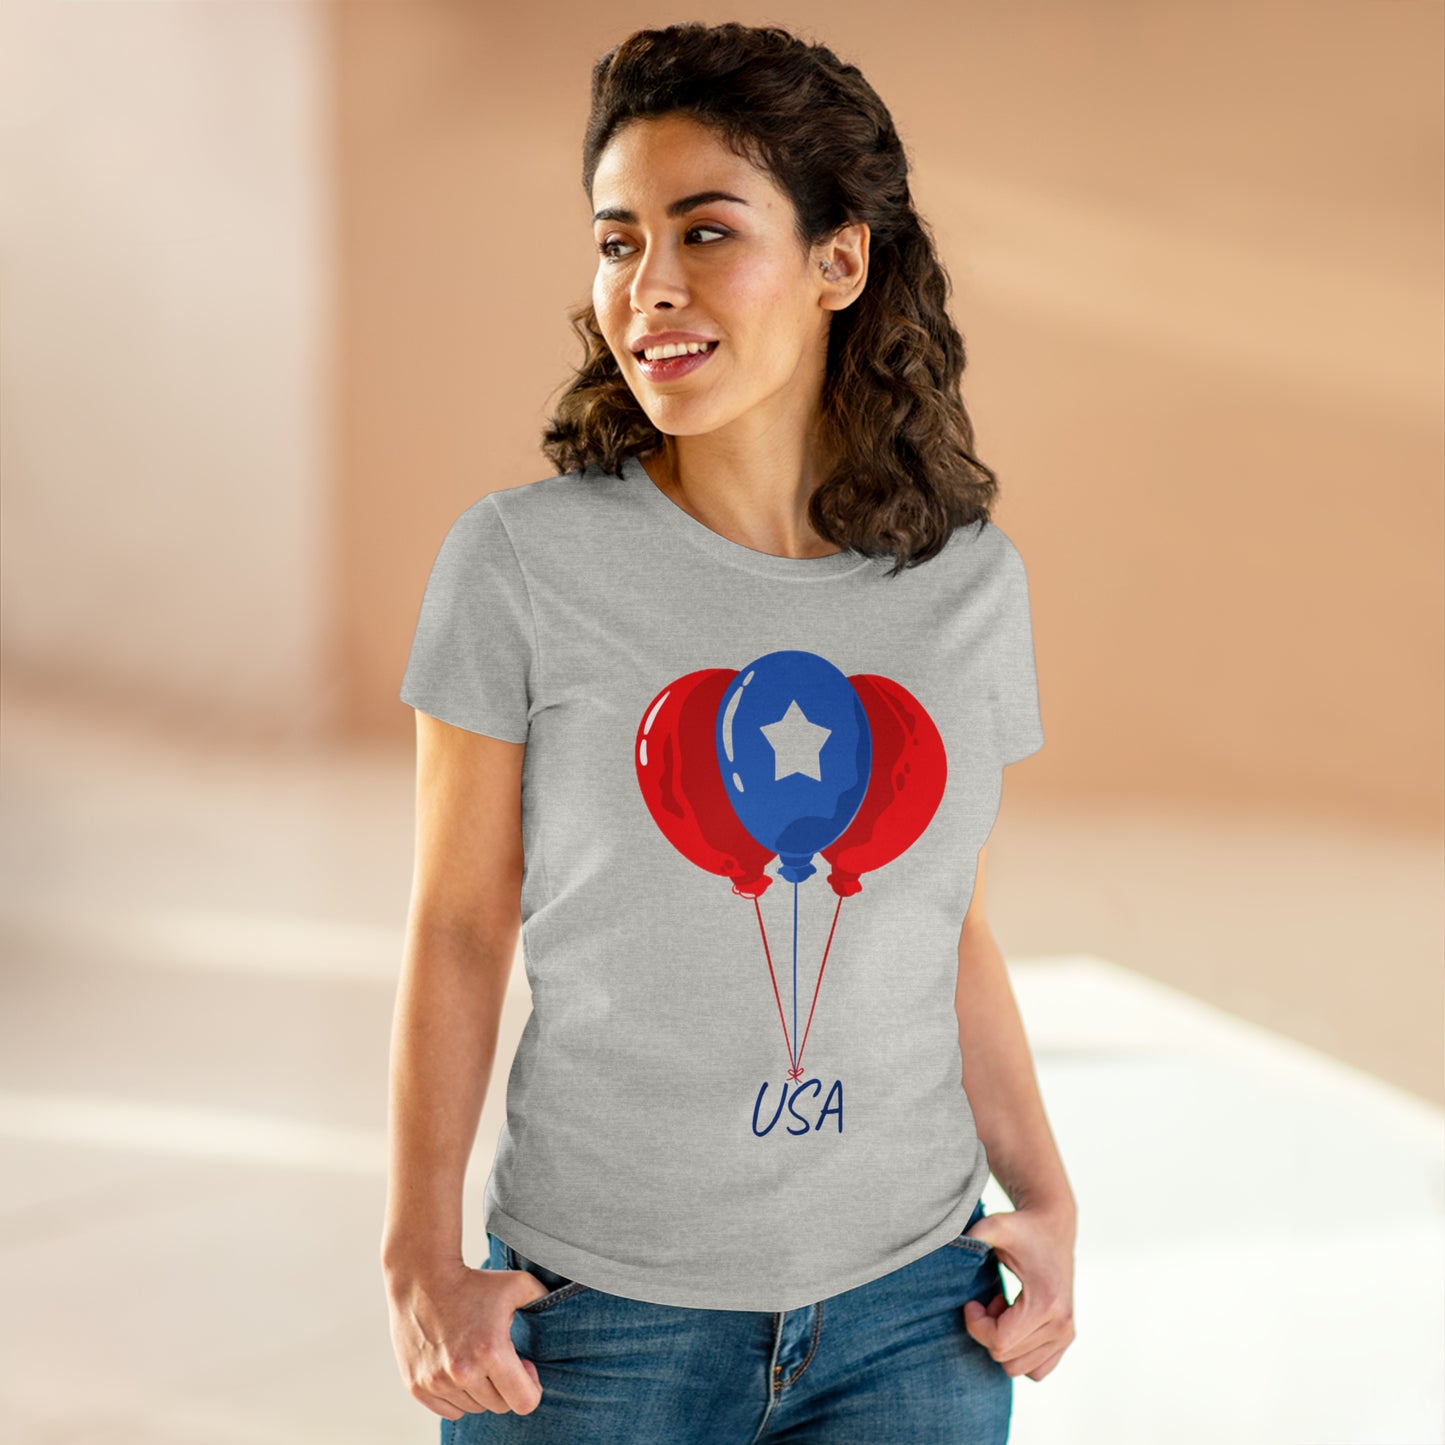 Celebrating Labor Day #2 - Women's Midweight Cotton Tee